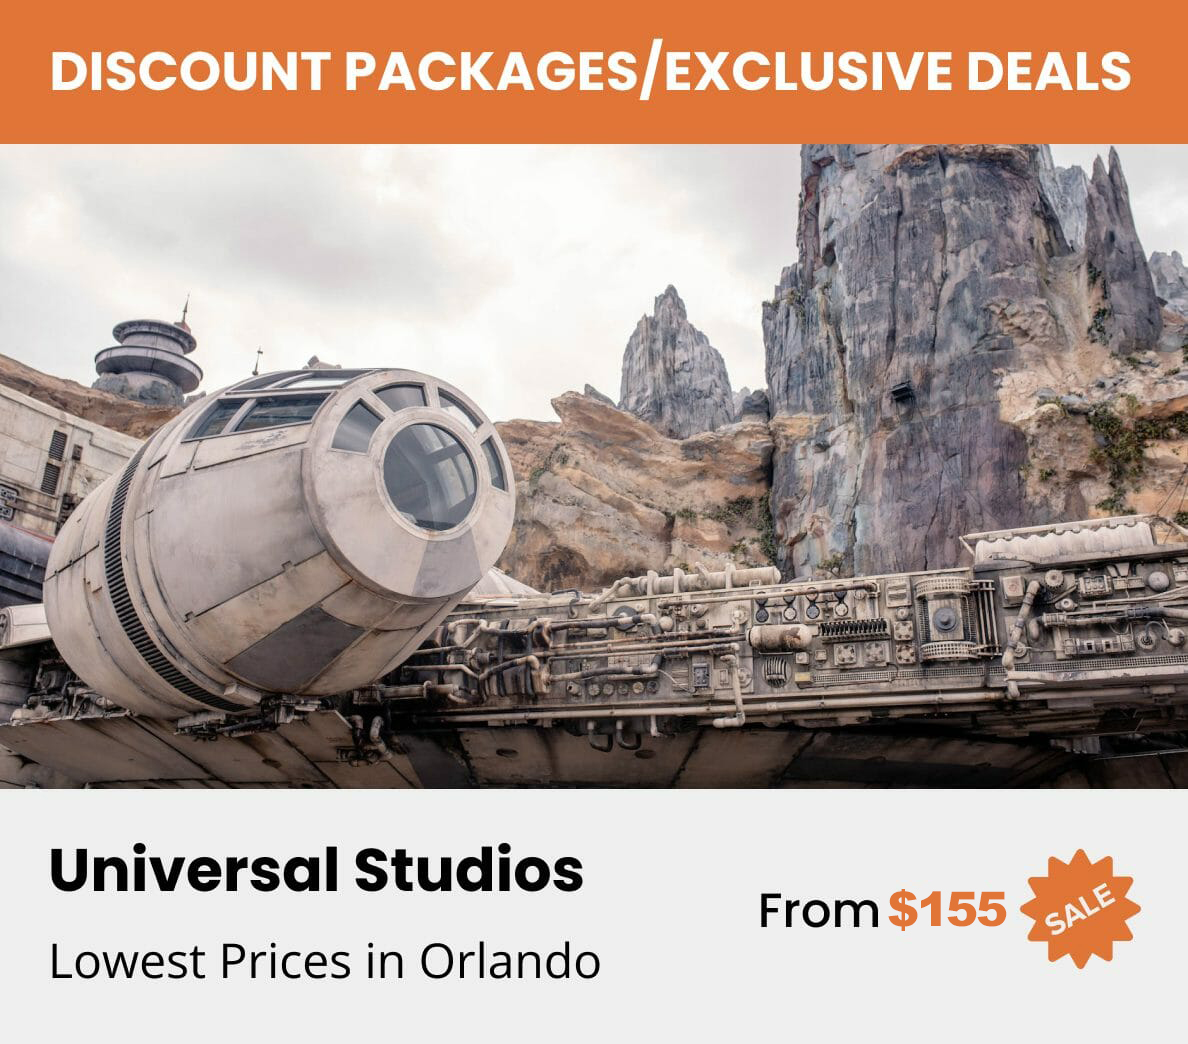 Universal Studios Discount Package and Exclusive Deals Orlandovacation.com